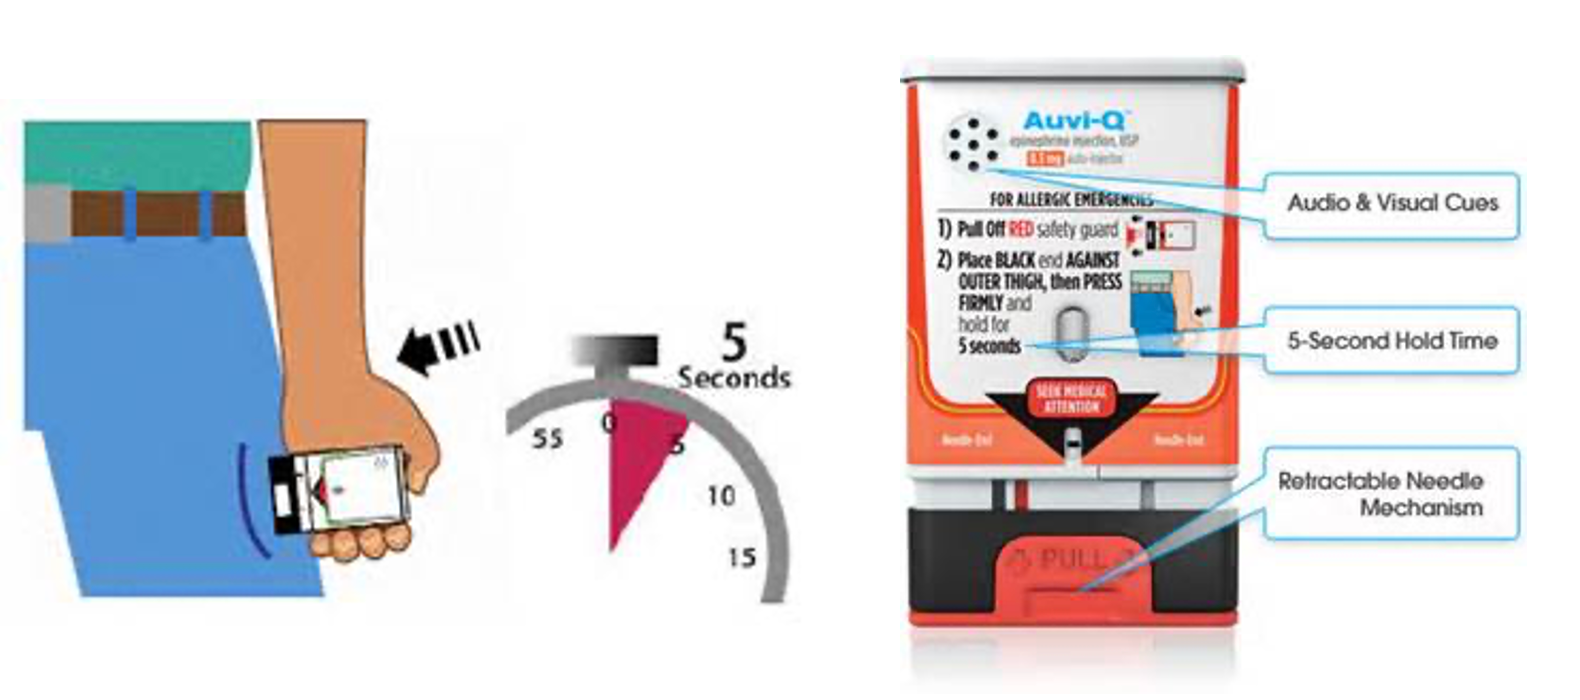 Example of a Auvi Q auto injector